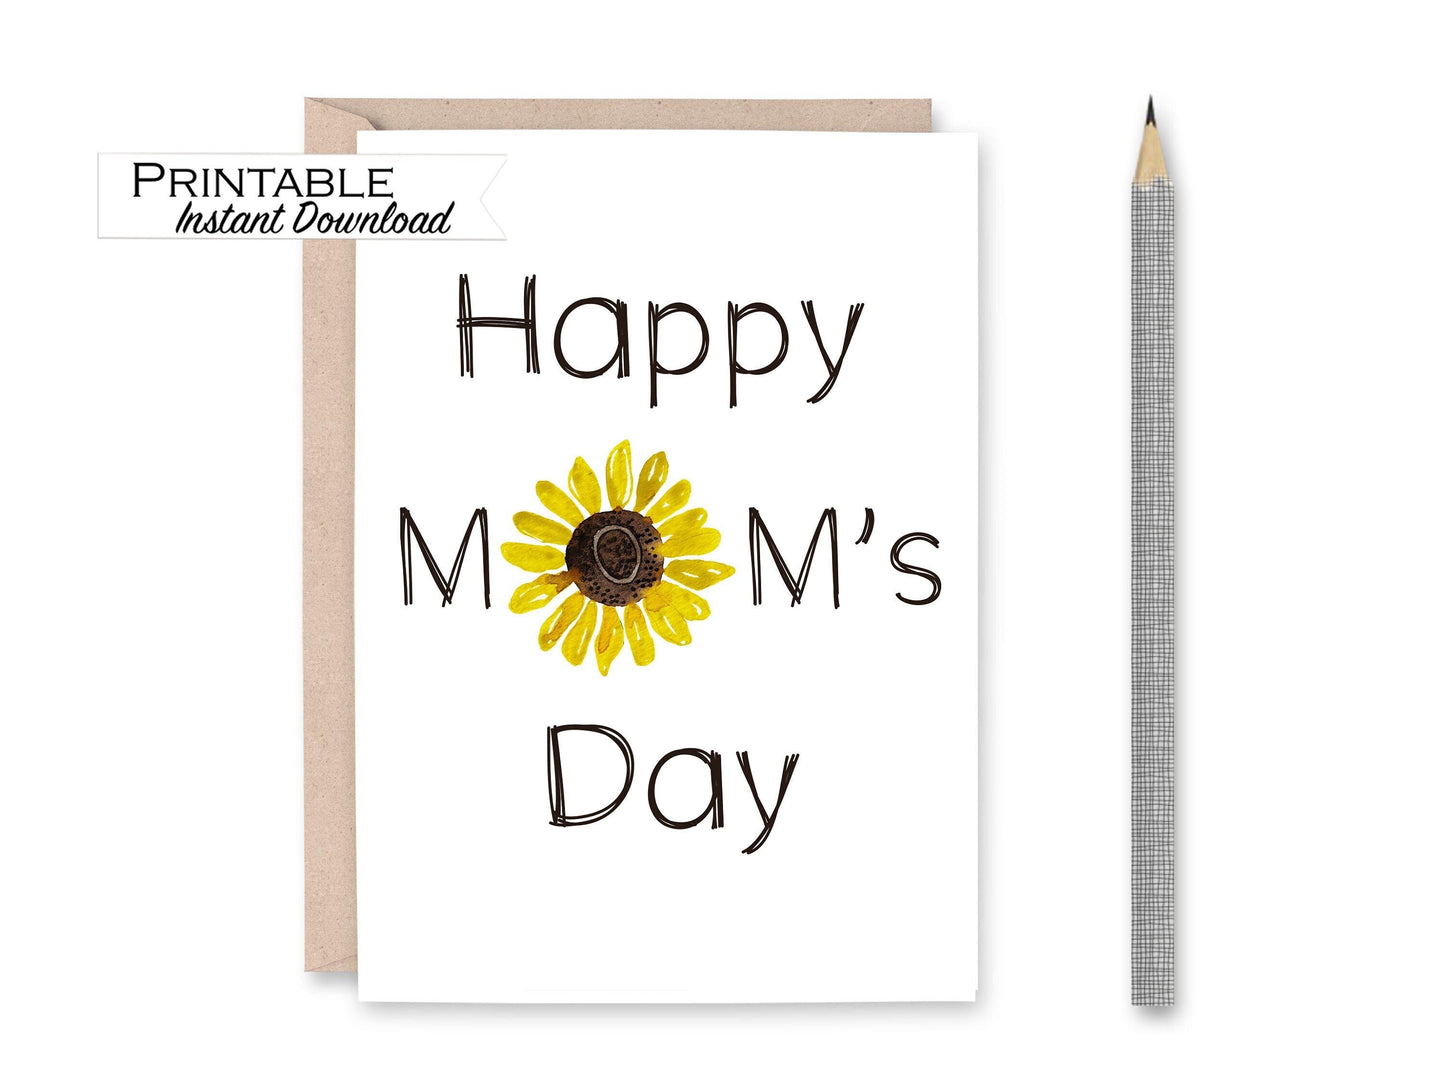 Watercolor Sunflower Mothers Day Card Printable, Happy Mom's Day Card Instant Download